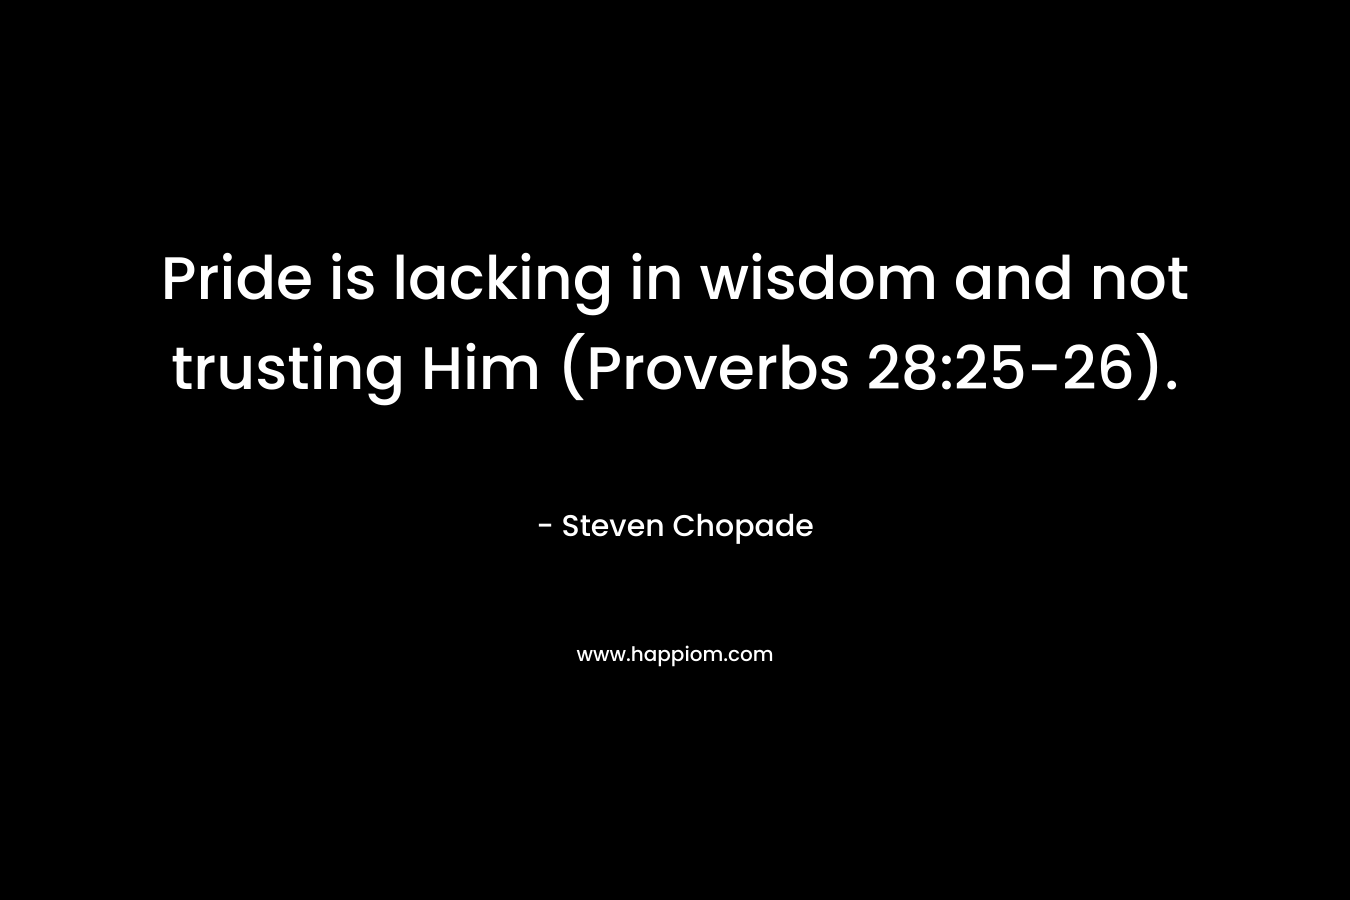 Pride is lacking in wisdom and not trusting Him (Proverbs 28:25-26). – Steven Chopade